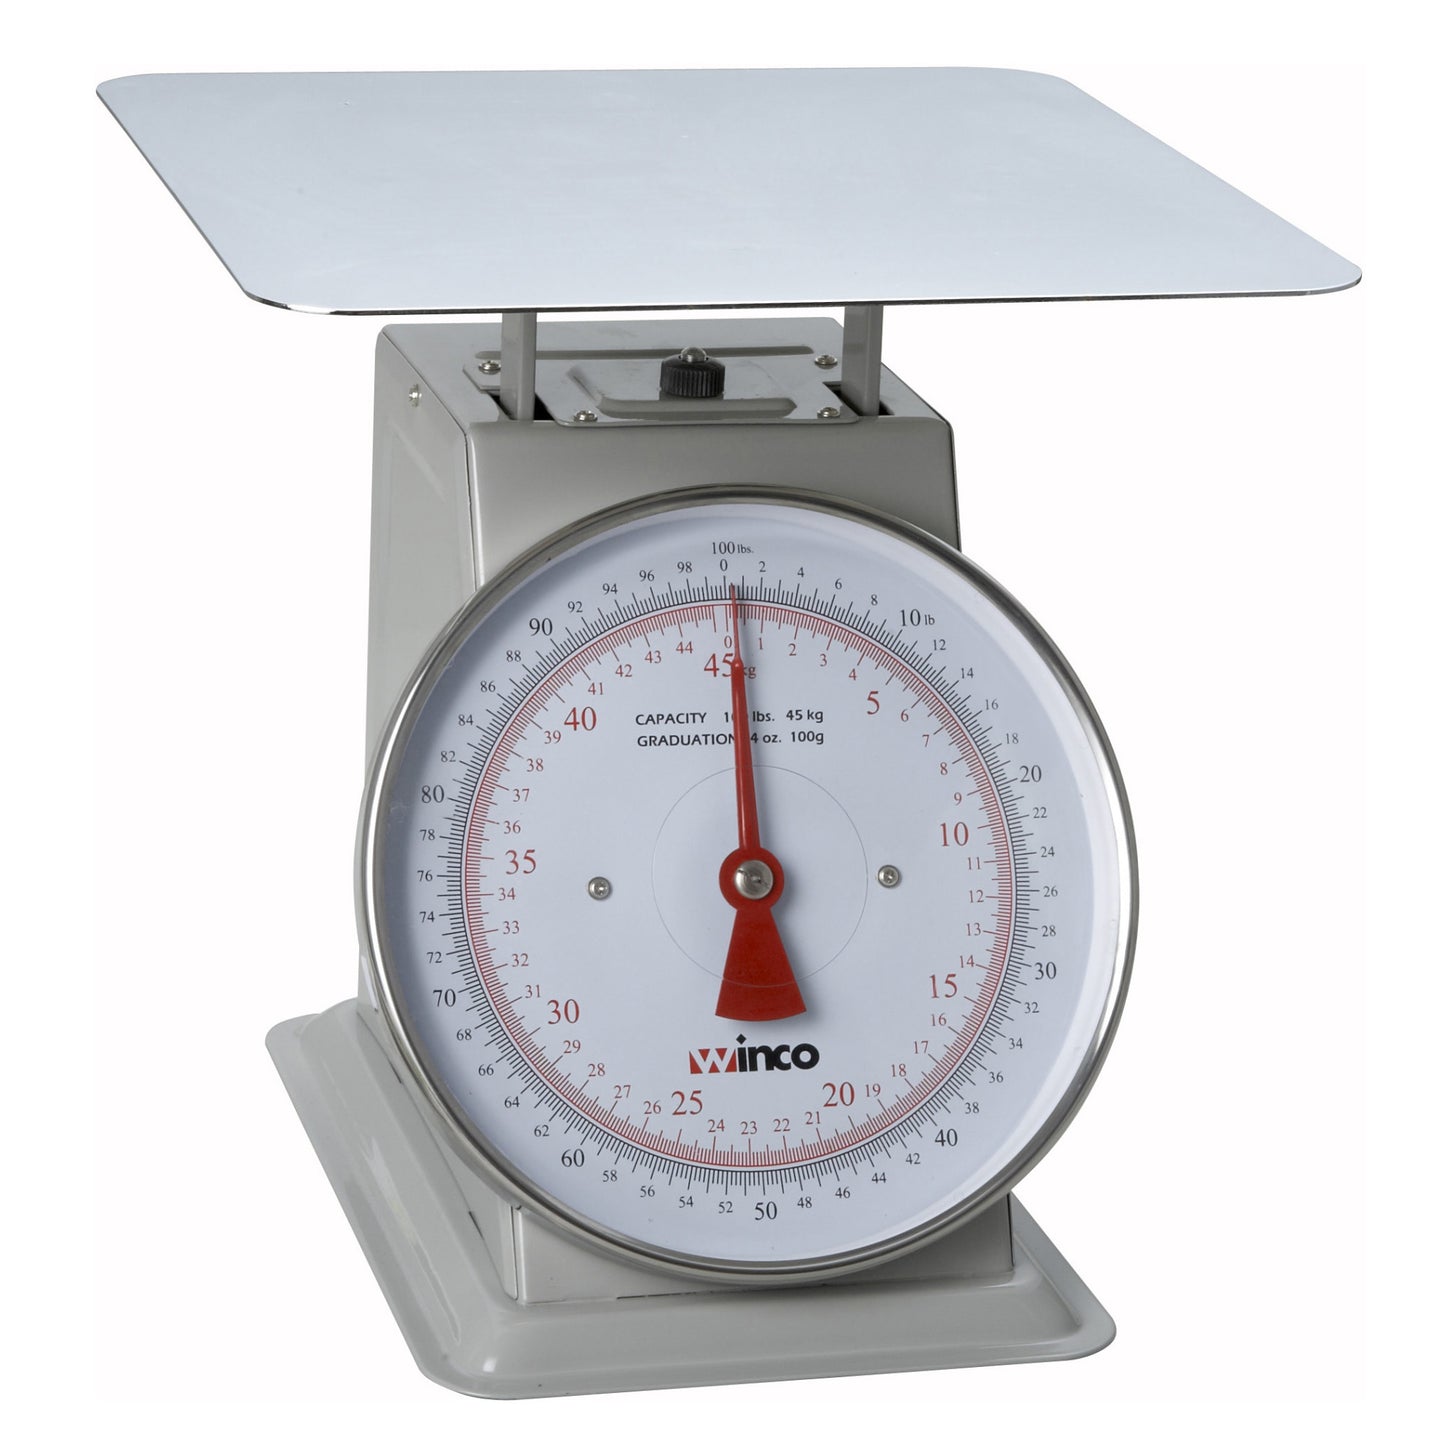 SCAL-9100 - Receiving Scale - 100 lbs